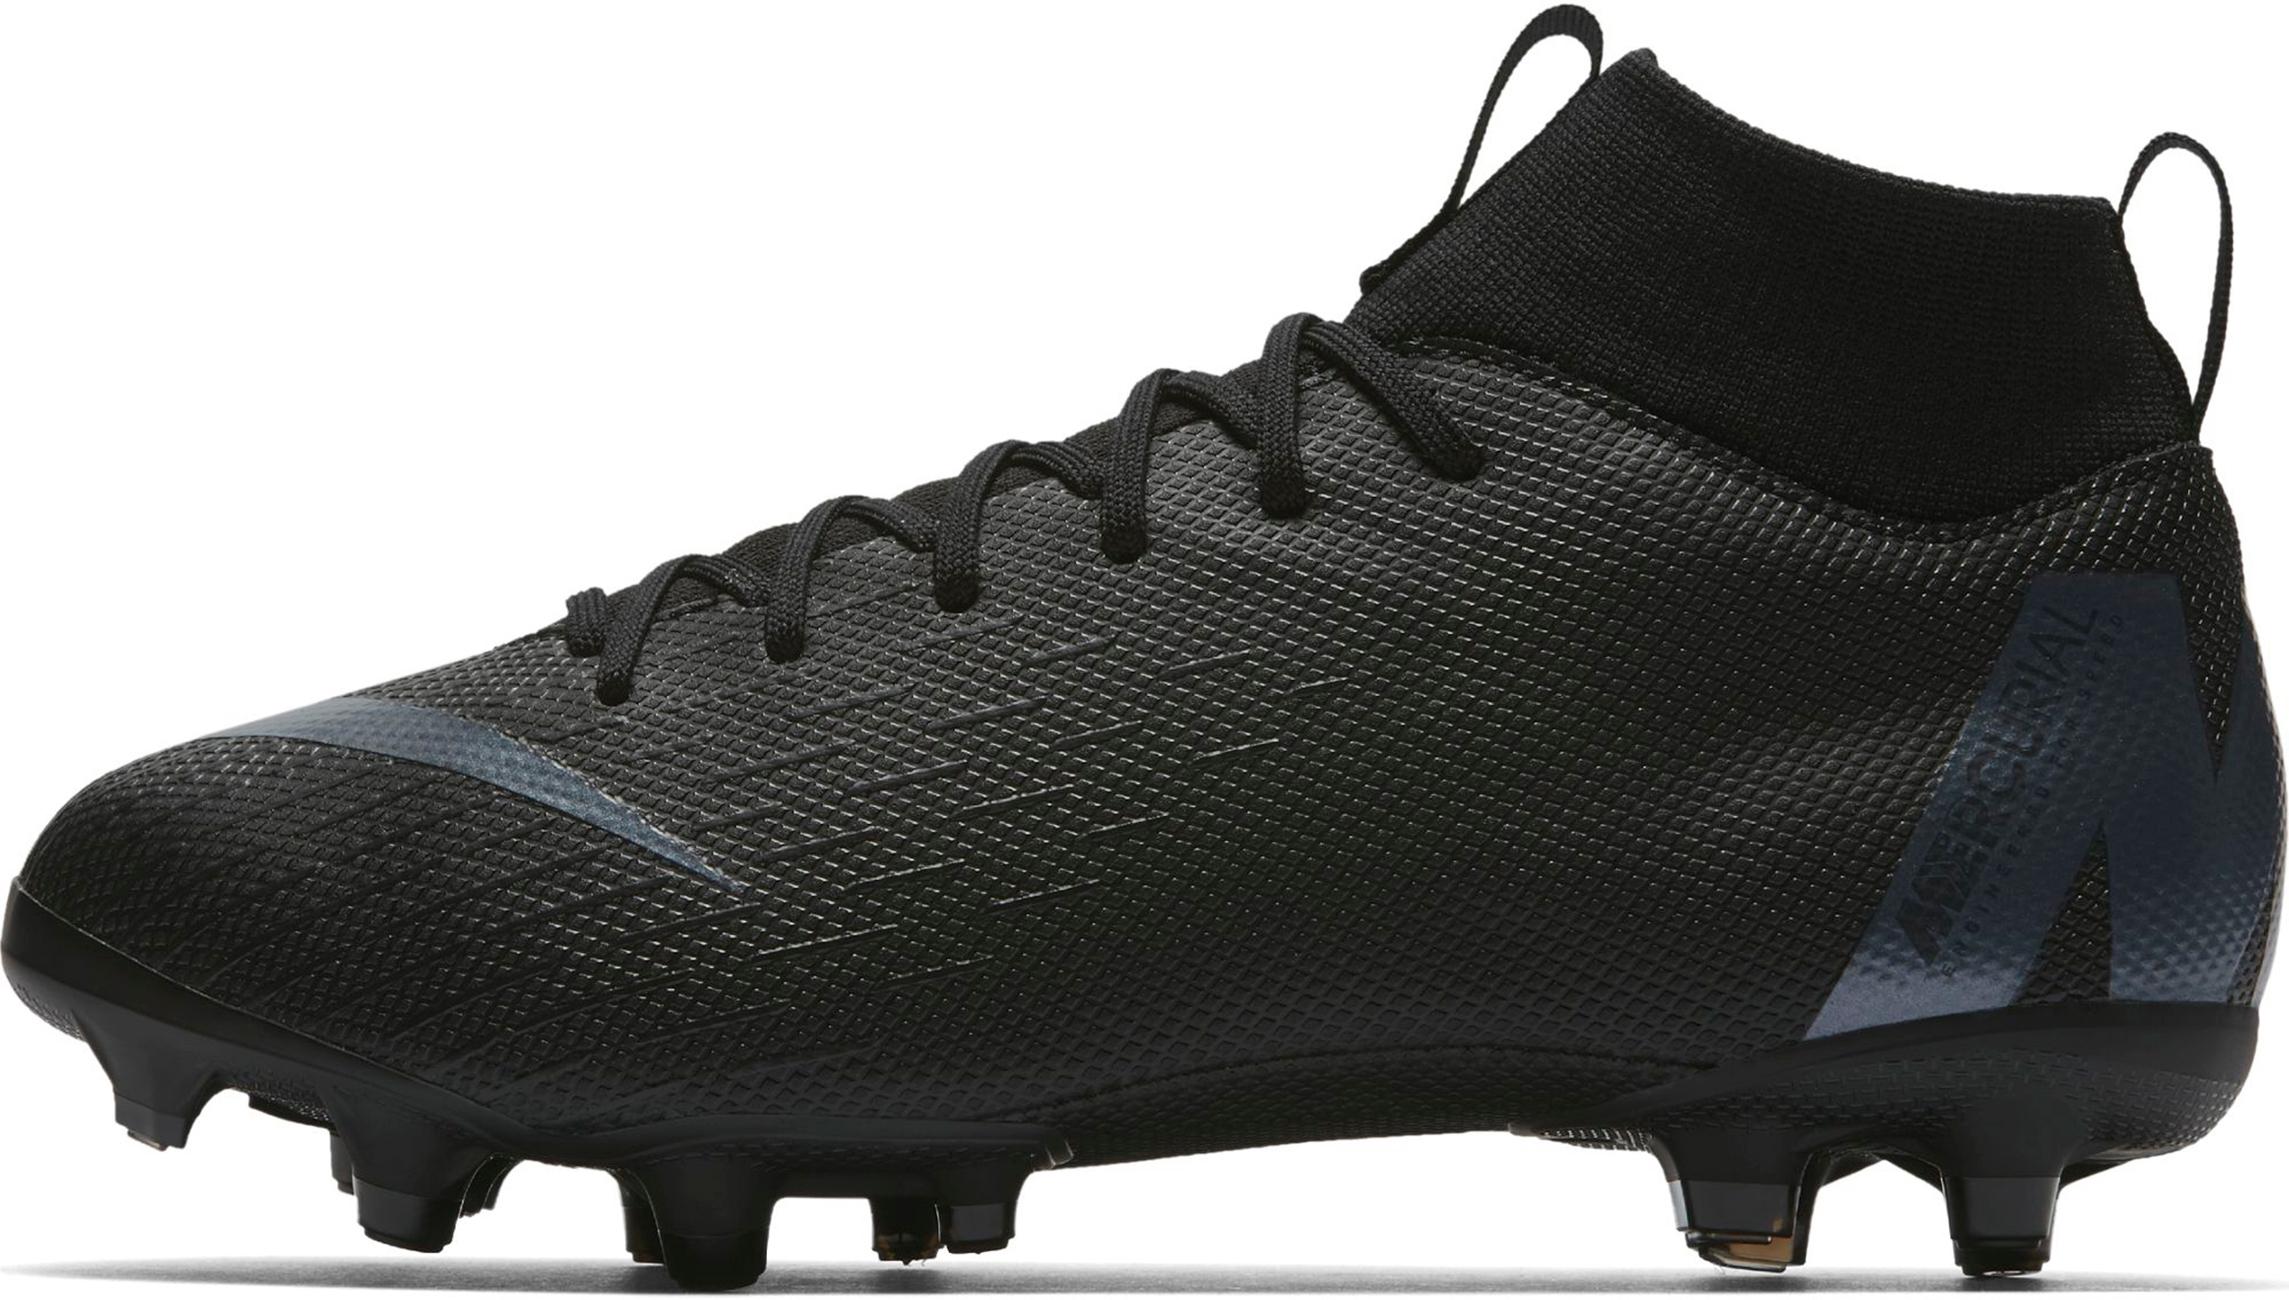 Nike Superfly 6 Elite CR7 FG Firm Ground Soccer Cleat Nike